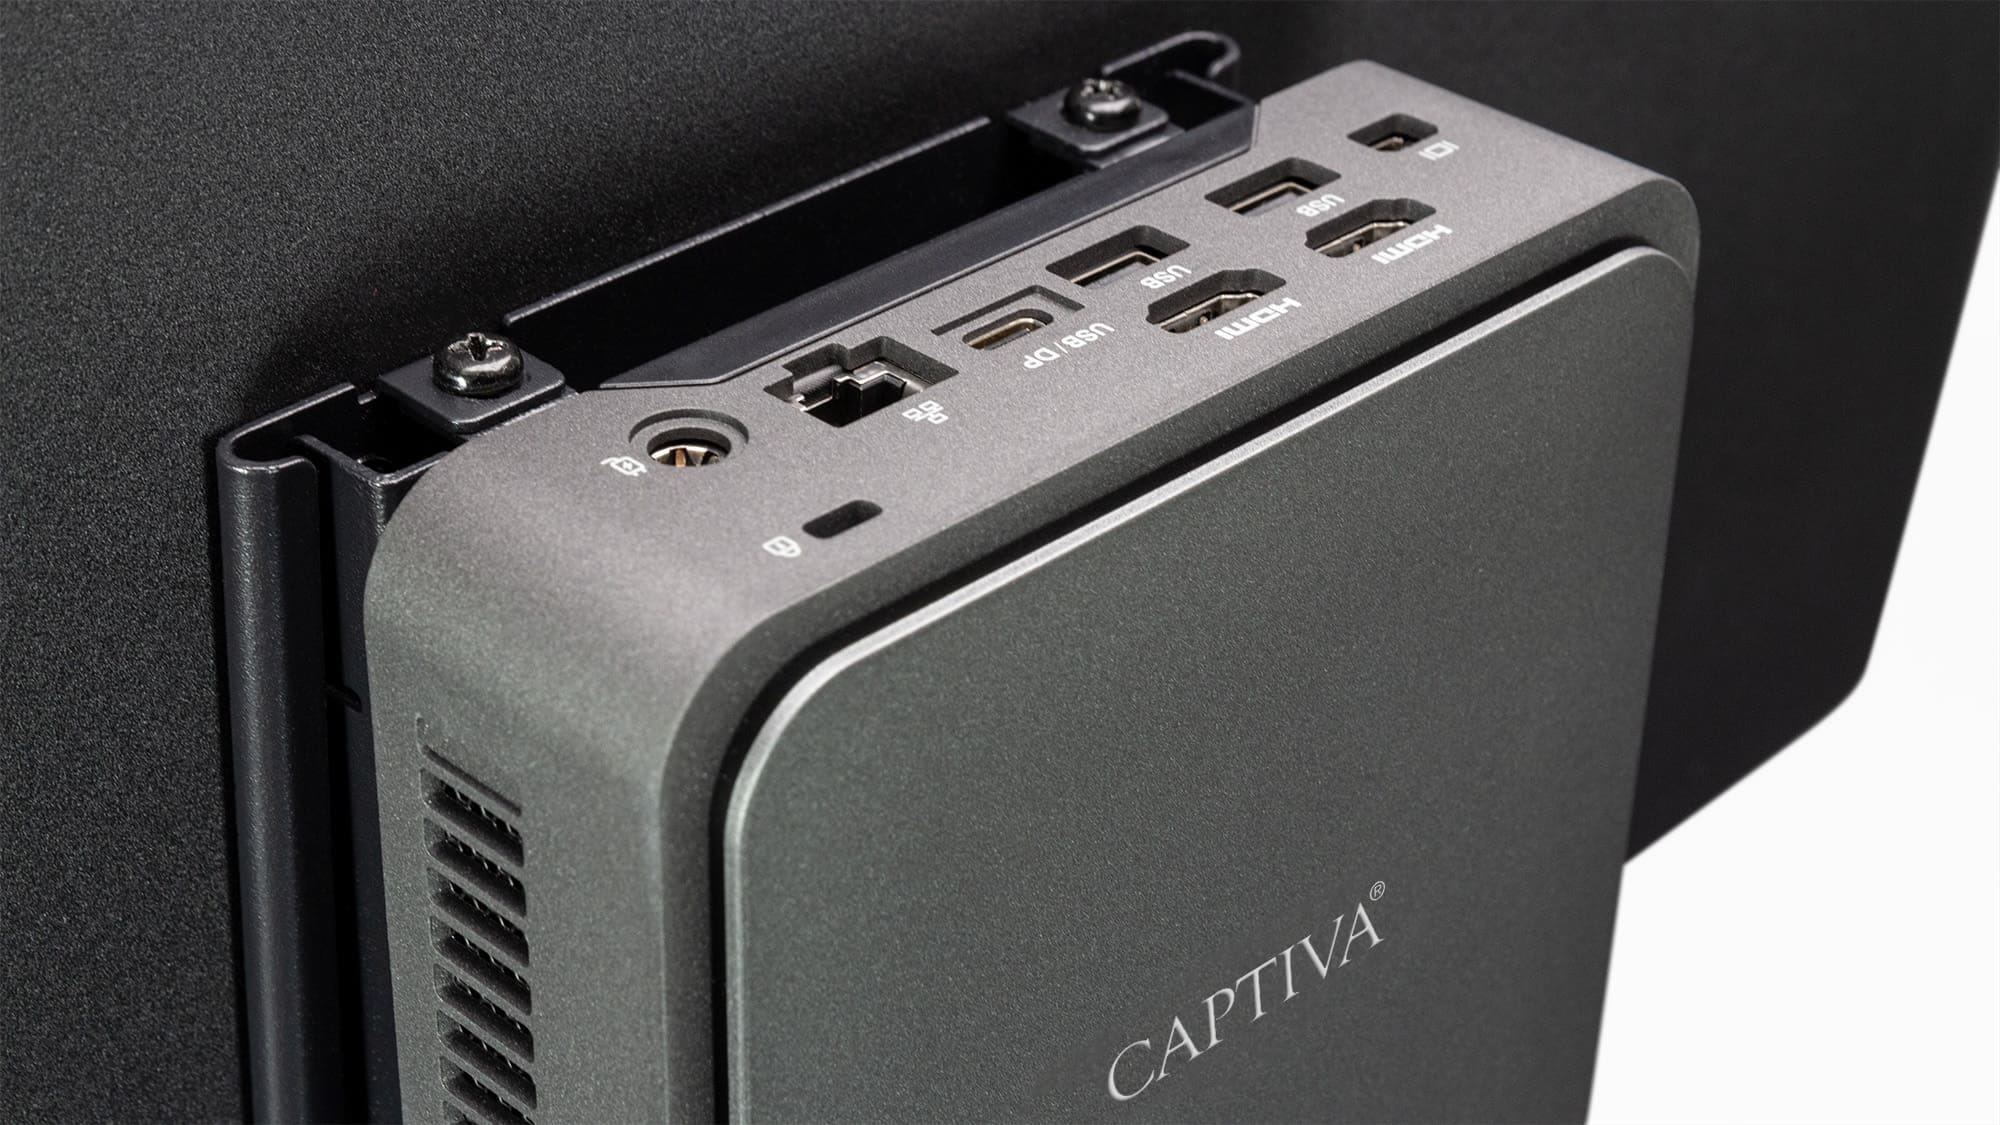 CAPTIVA All-in-One PC »All-In-One Power Starter I82-210«